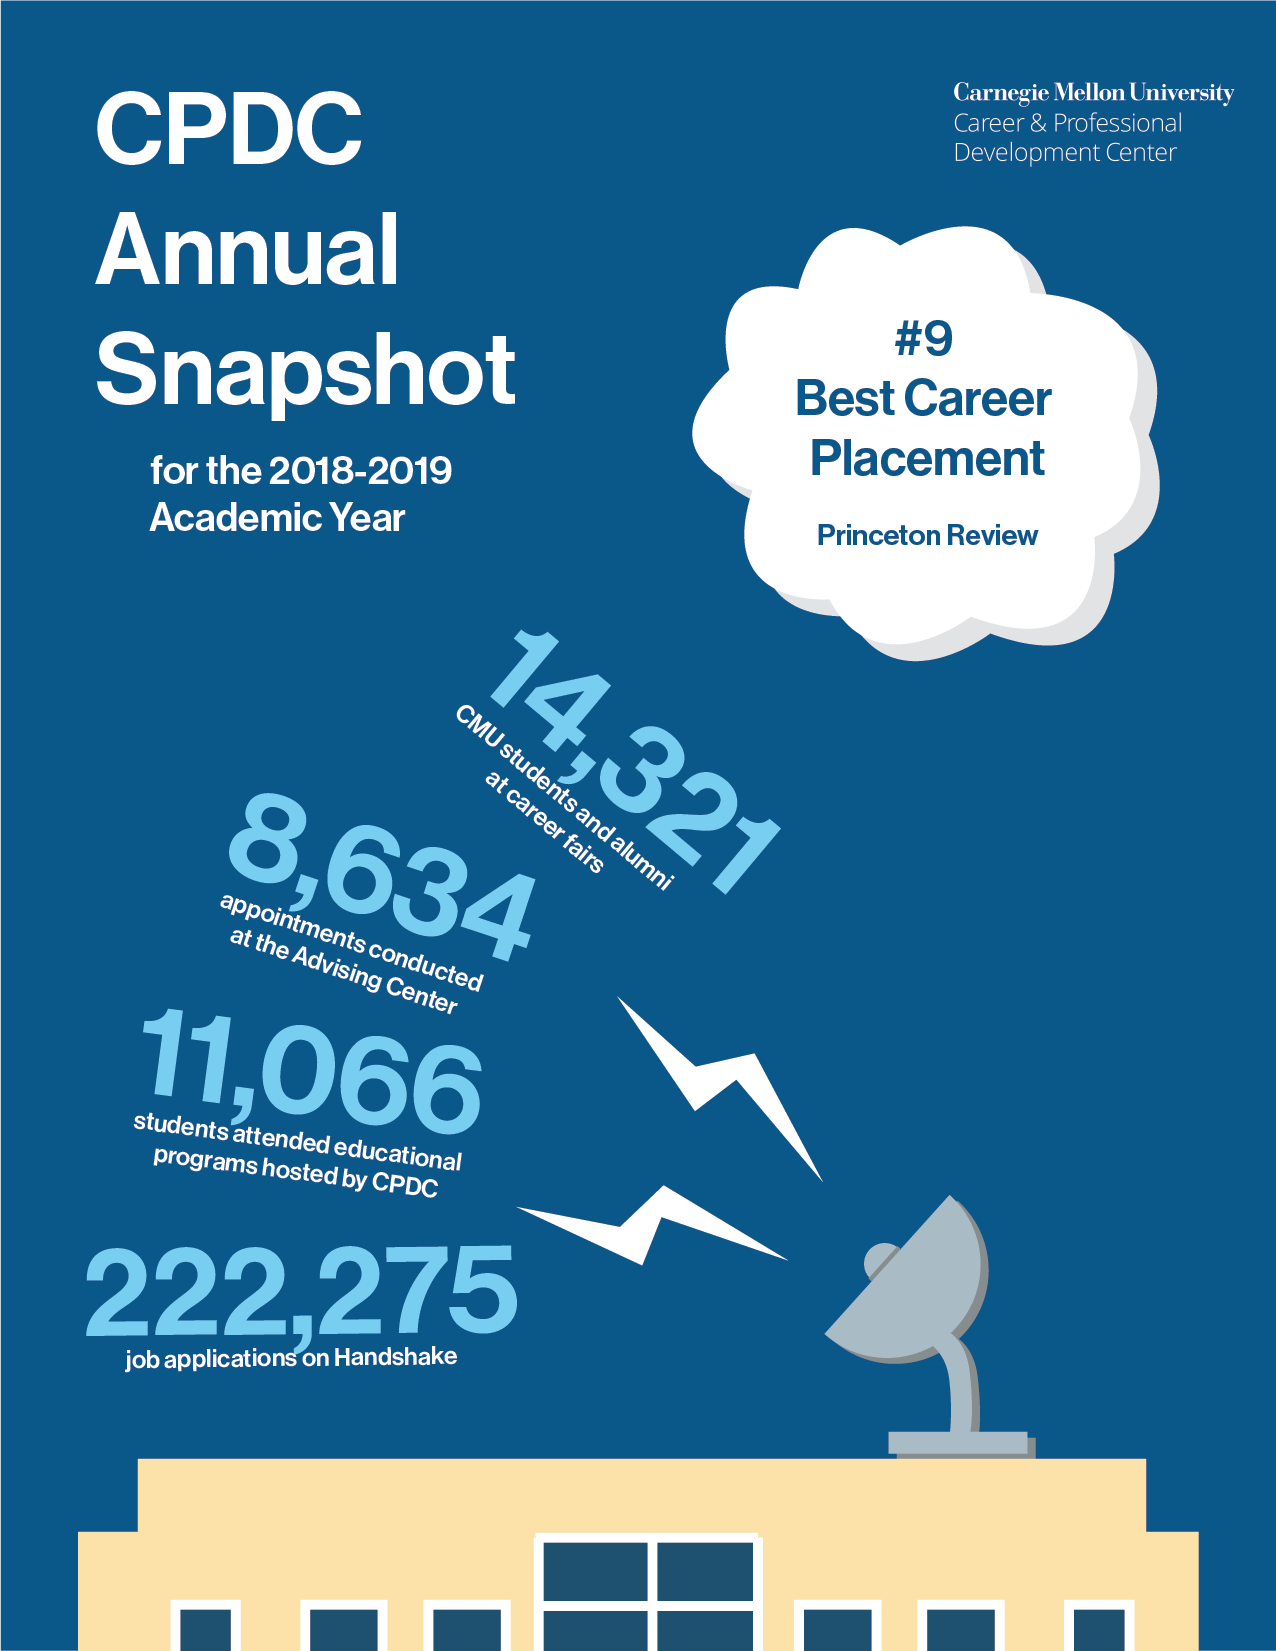 CPDC Annual Snapshot fast facts